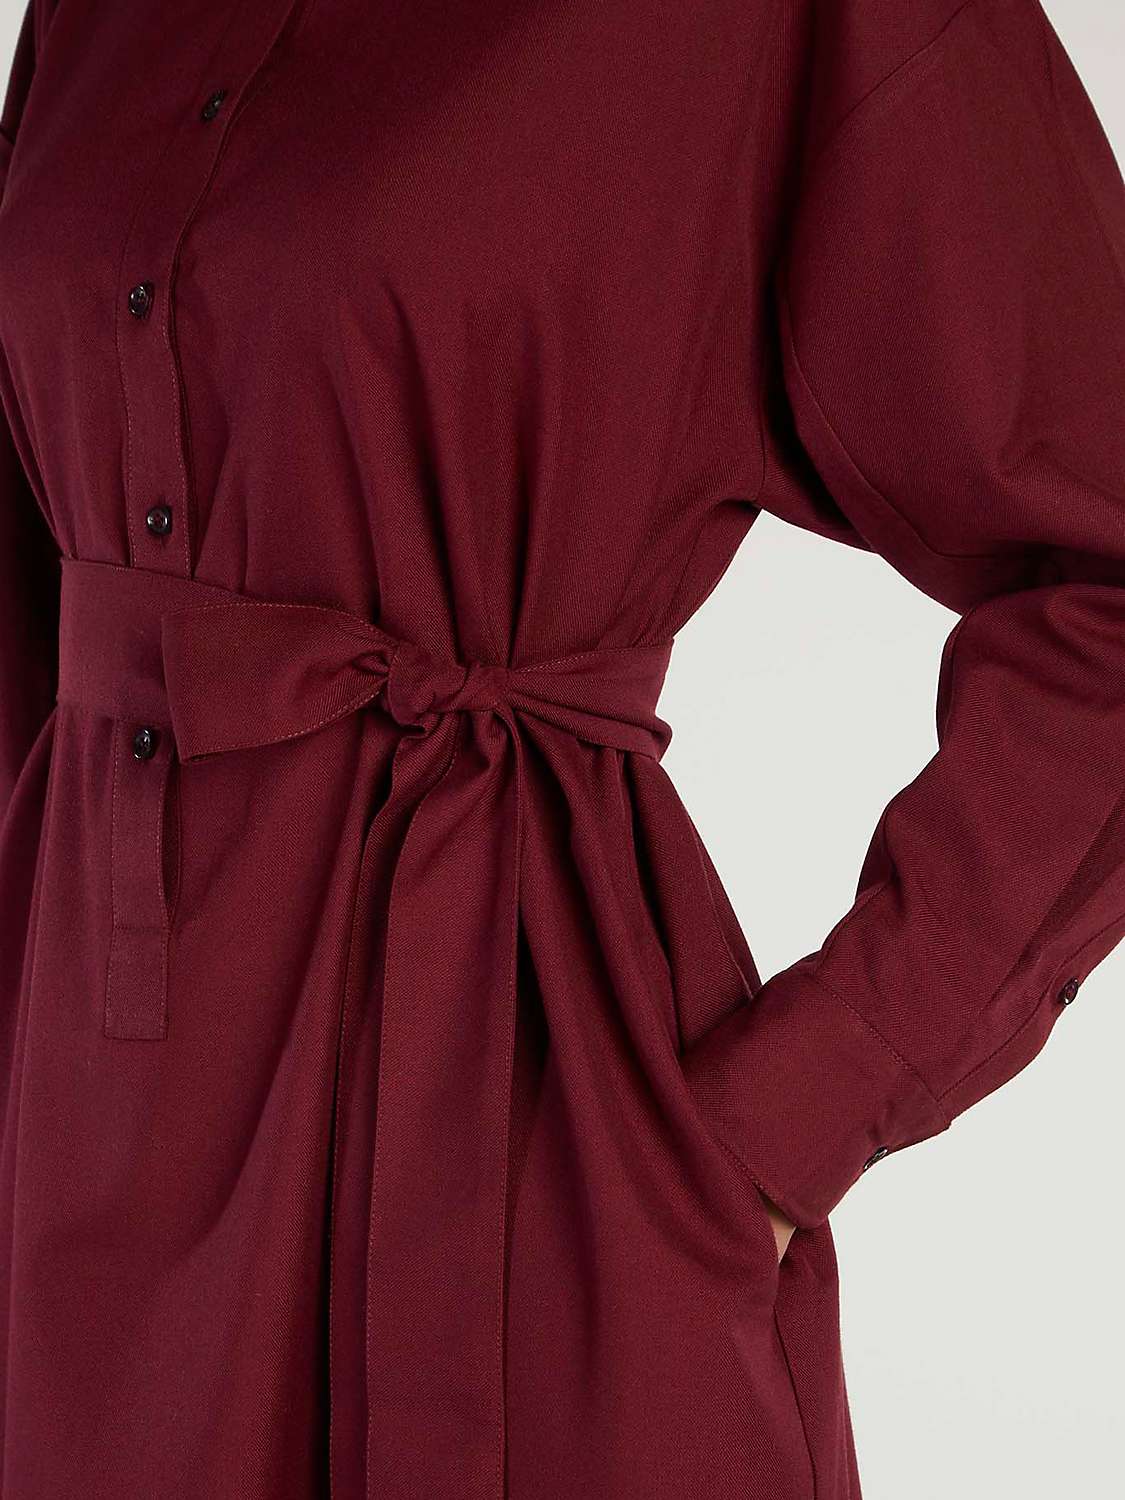 Buy Aab Loose Fit Shirt Dress, Red Online at johnlewis.com